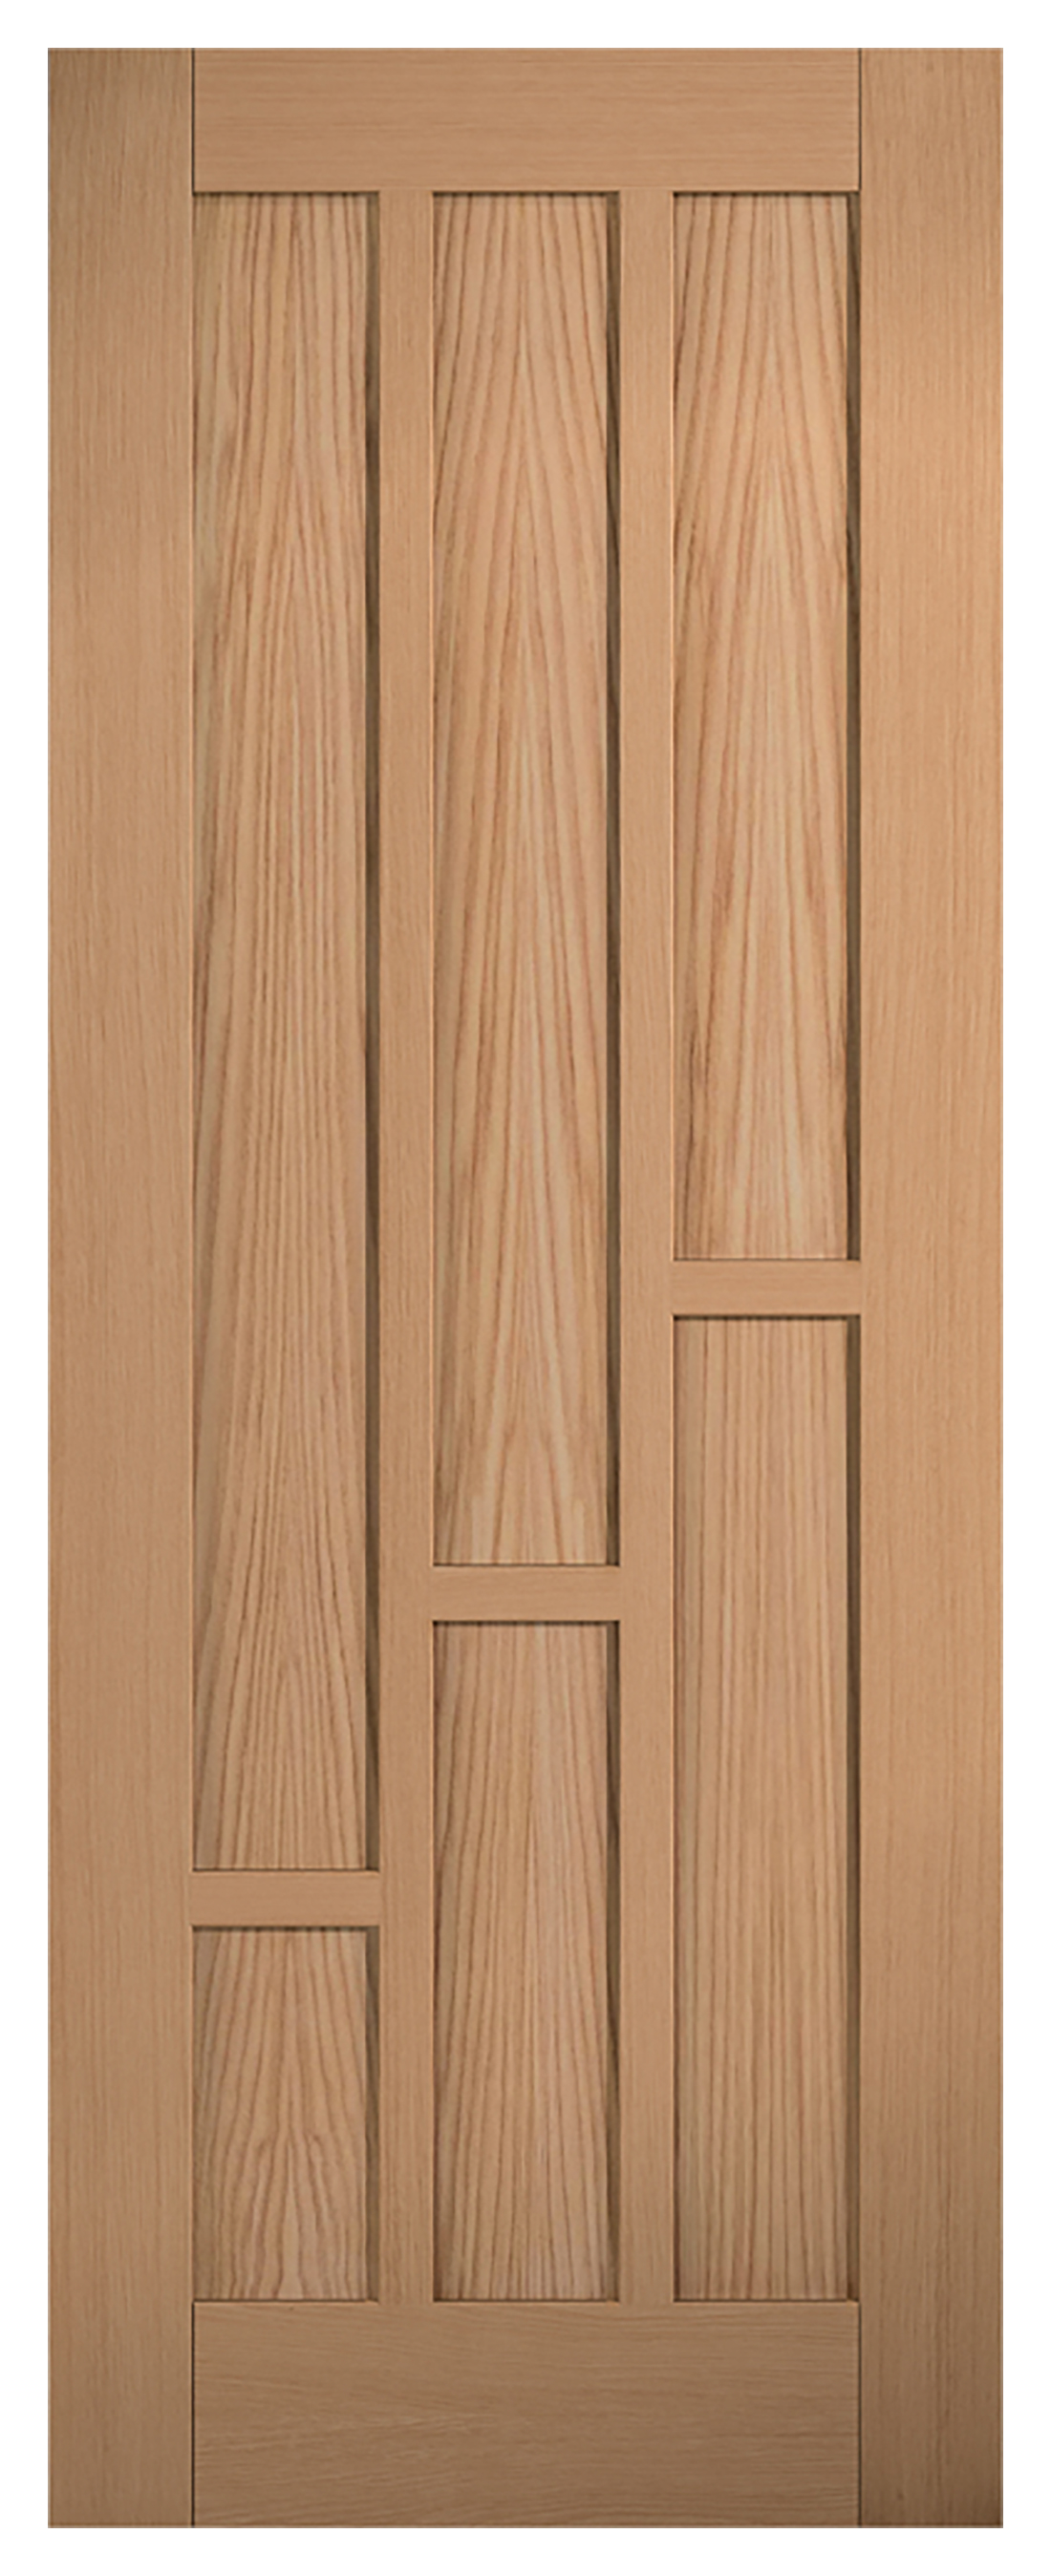 Image of LPD Internal Coventry 6 Panel Unfinished Oak FD30 Fire Door - 838 x 1981mm